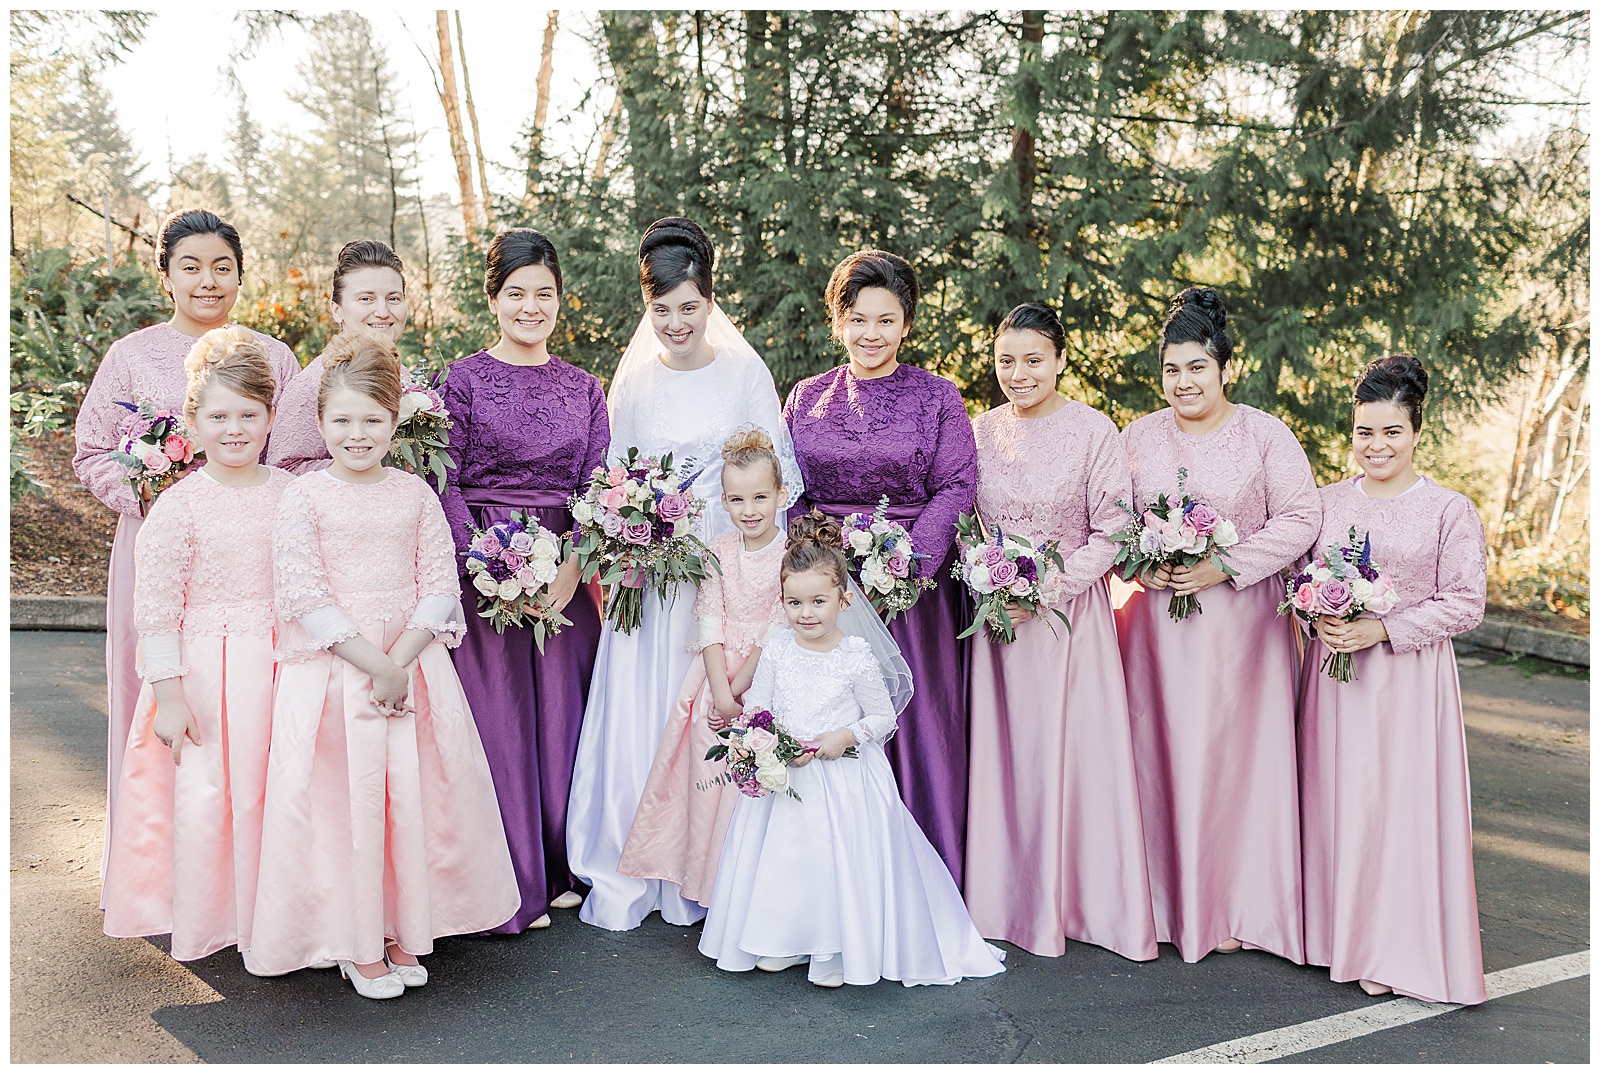 Bride with bridesmaids and flower girls